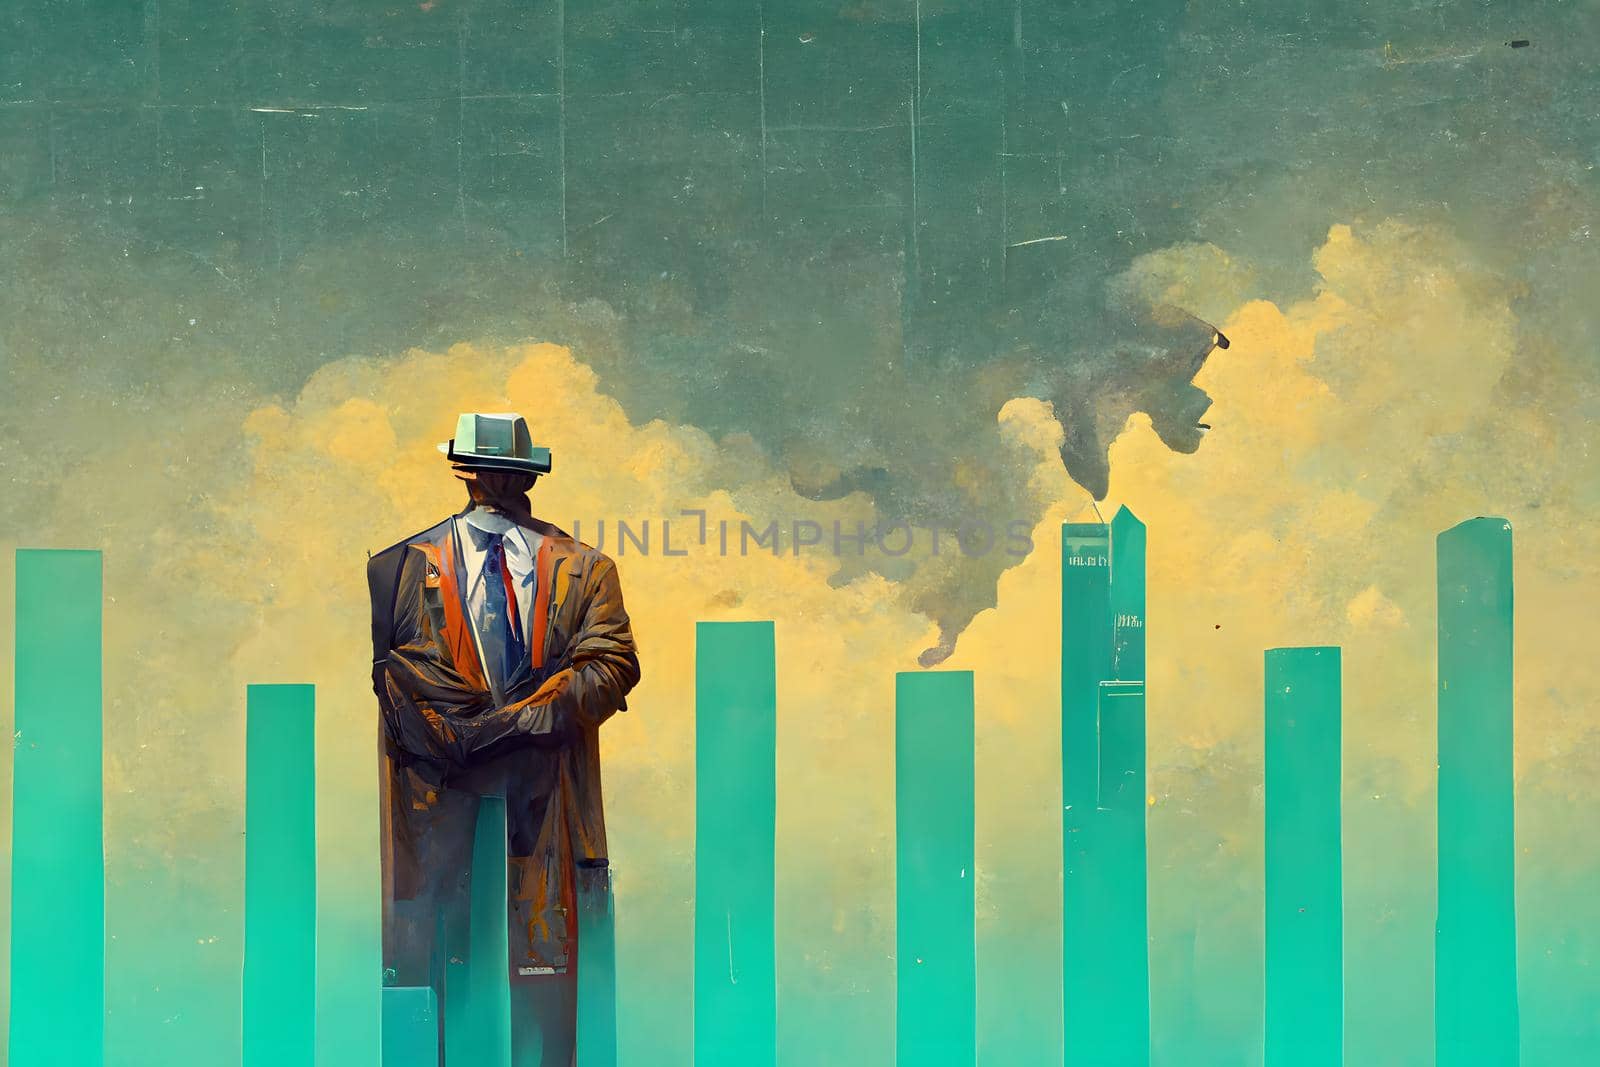 grotesque cartoon business man figure standing in front of bizarre styled charts and skyscraper buildings, neural network digitally generated art. Not based on any actual scene or pattern.